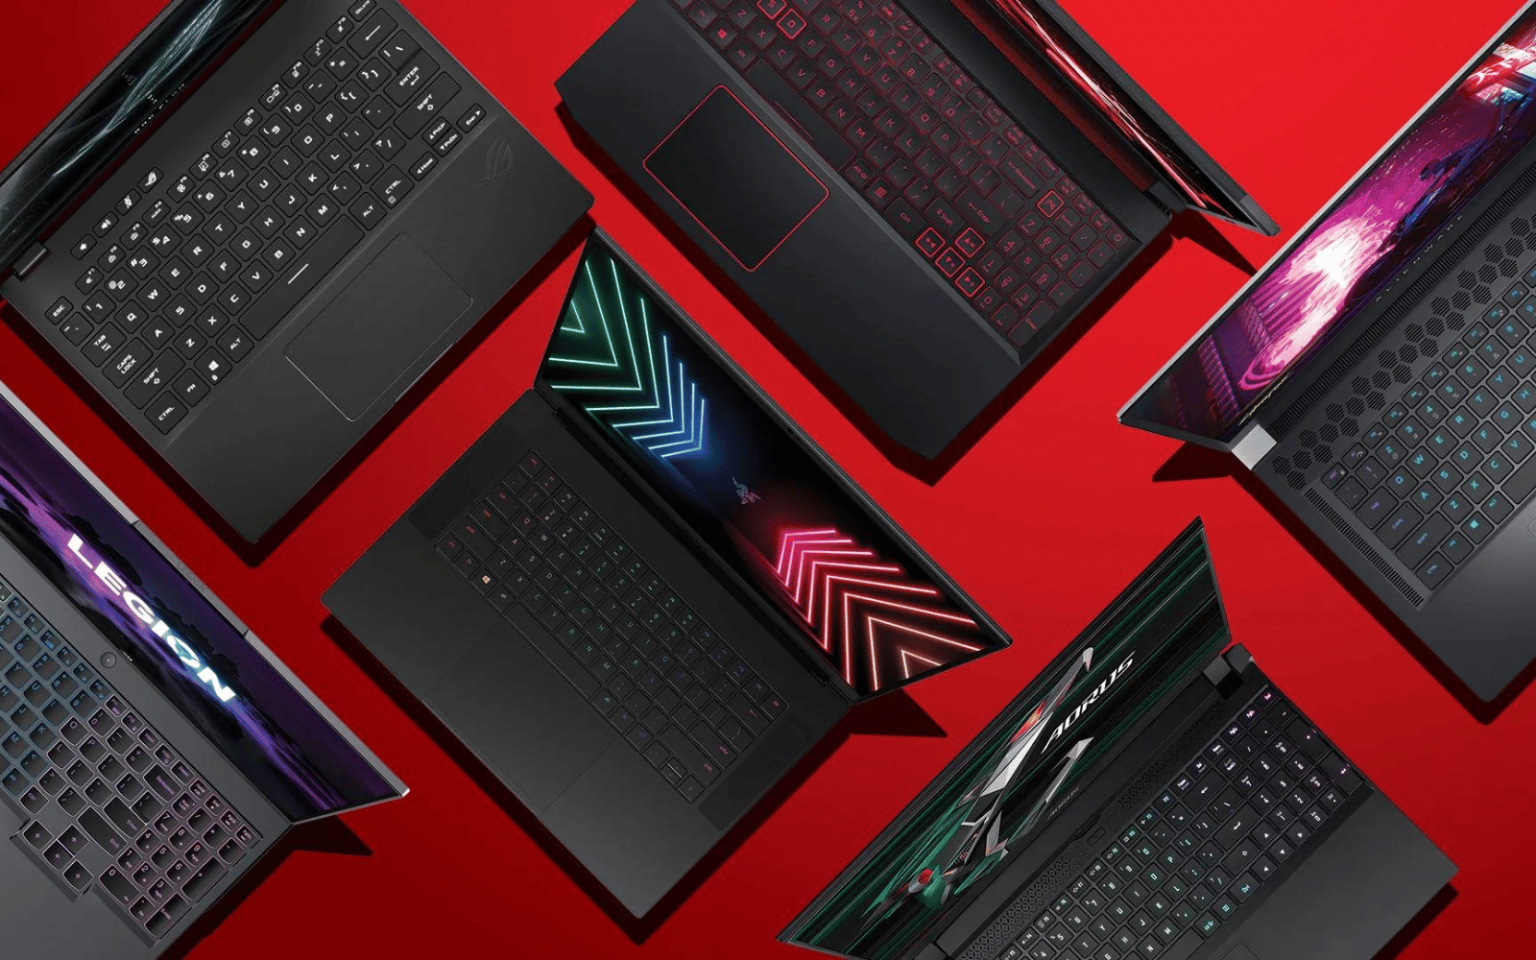 An assortment of gaming laptops on a red background